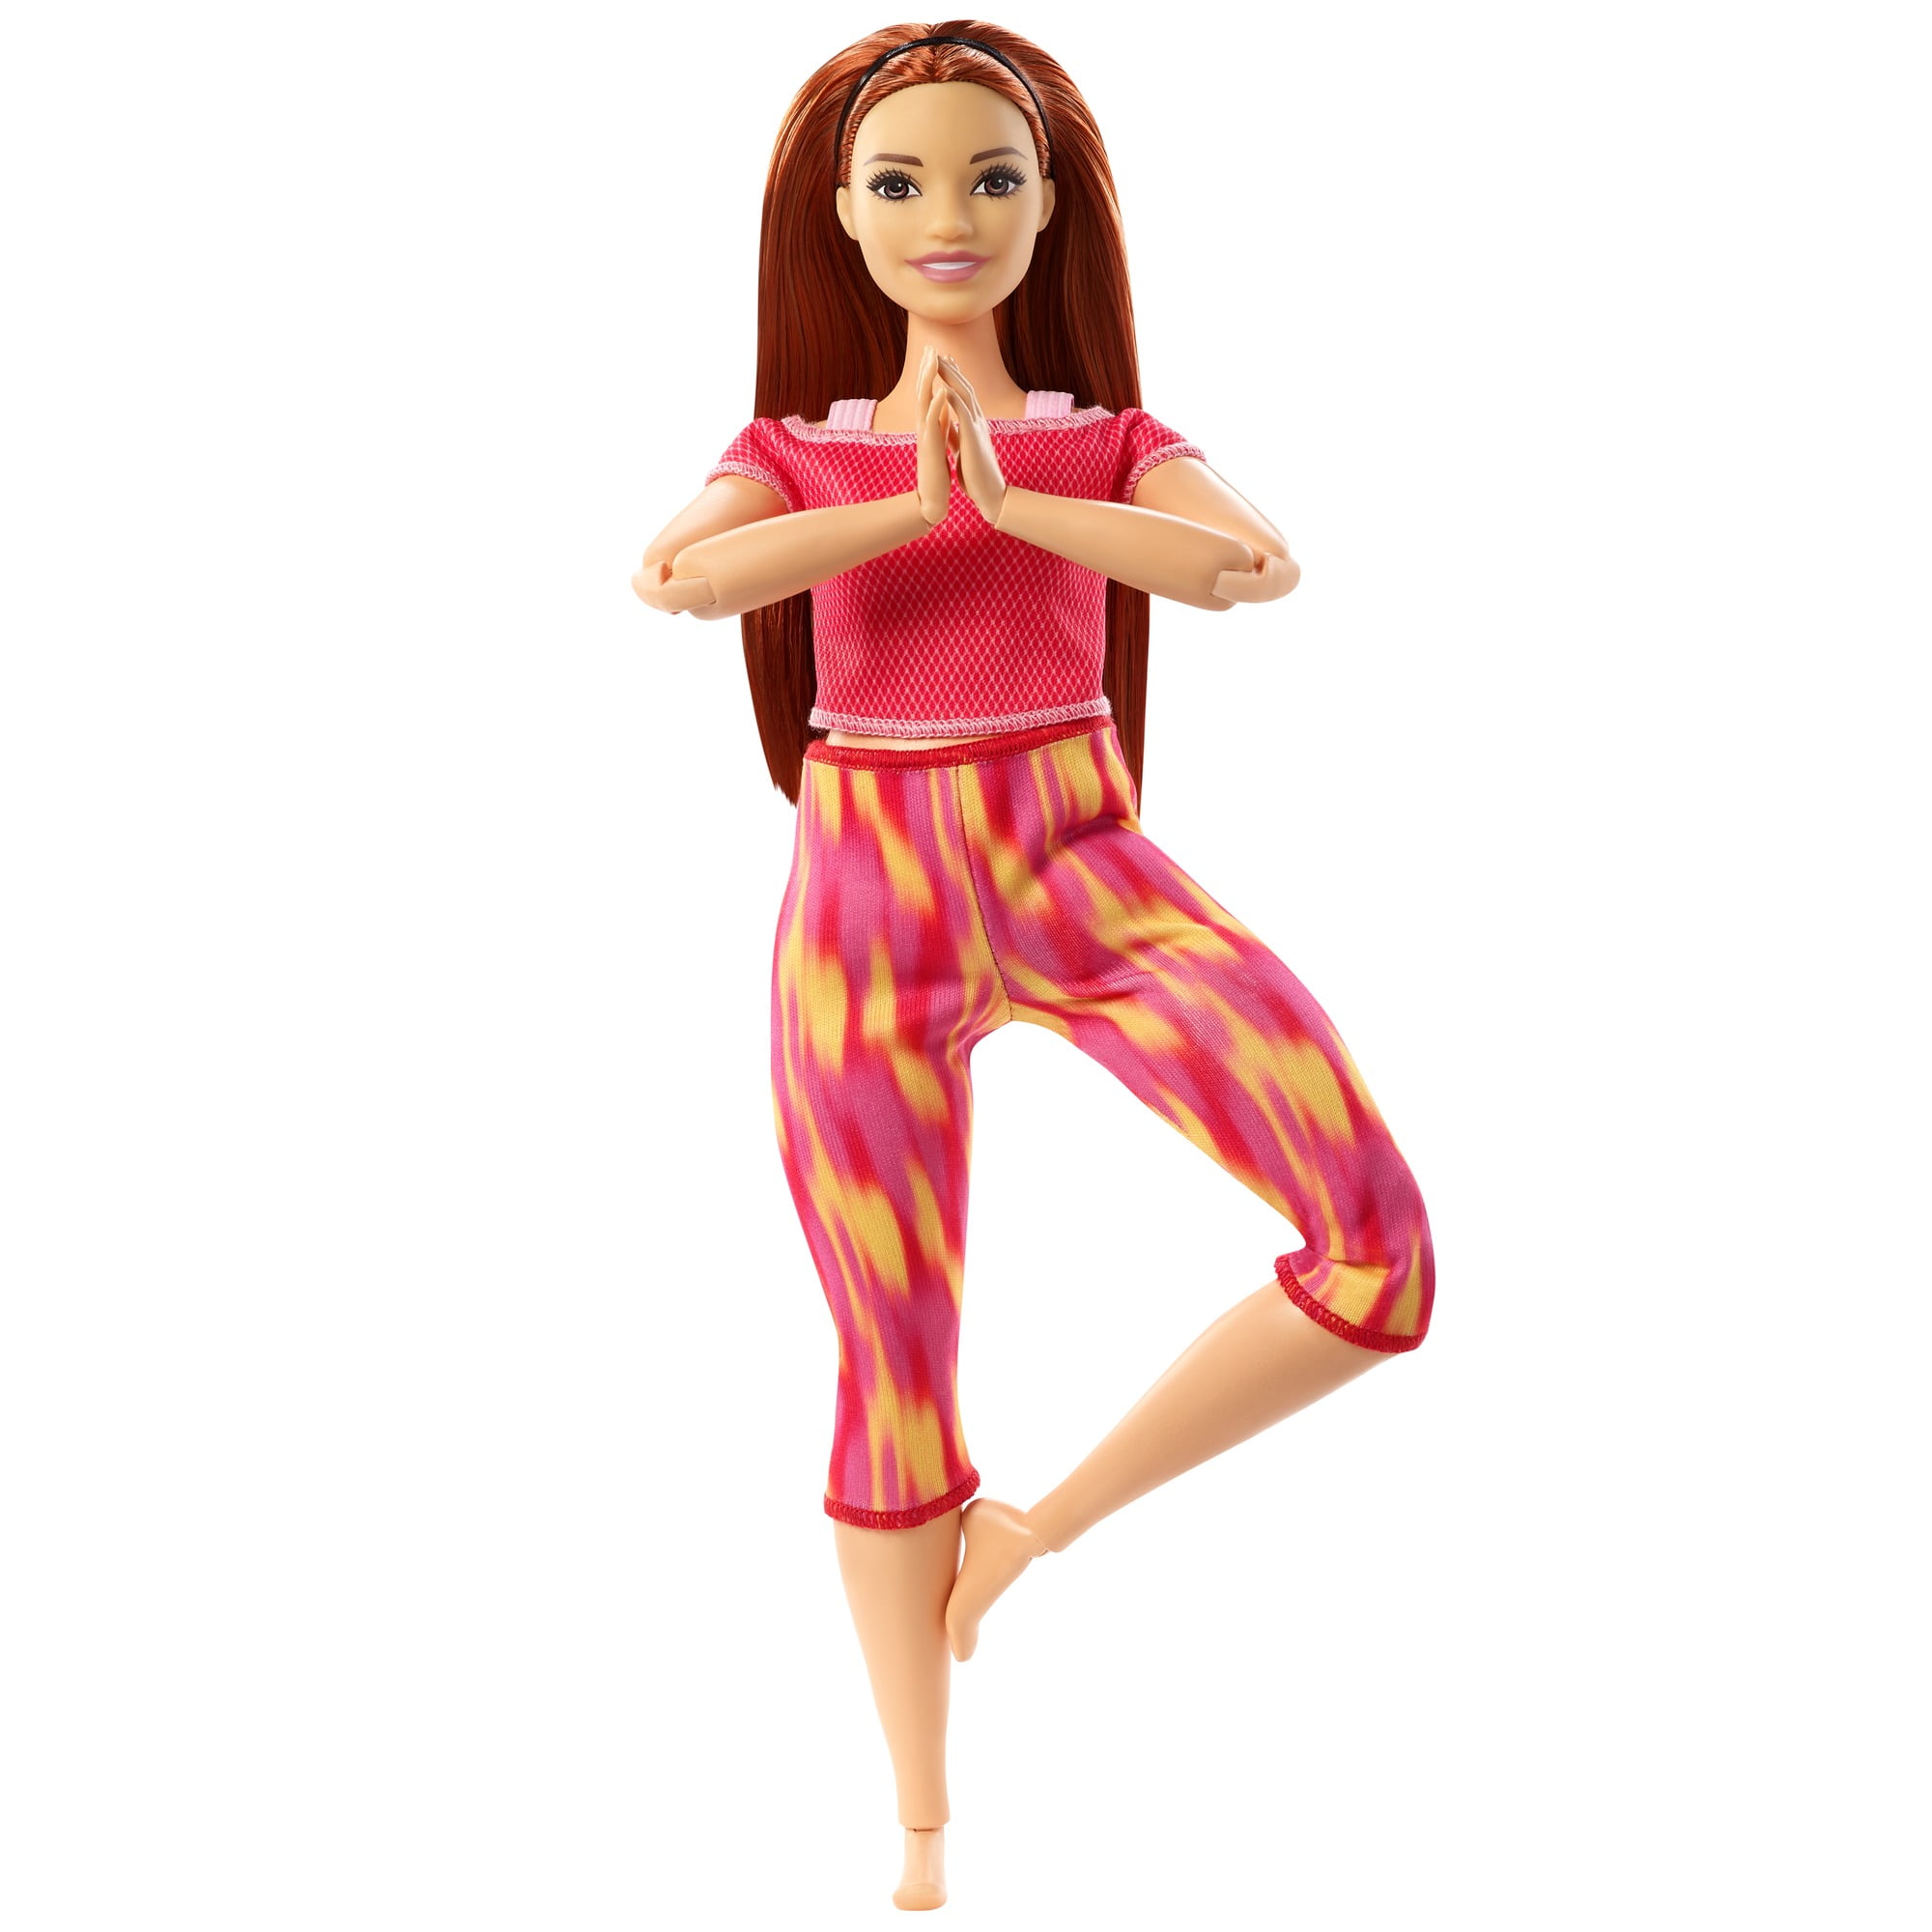 Barbie Made To Move Doll Styles May Vary Walmart Com